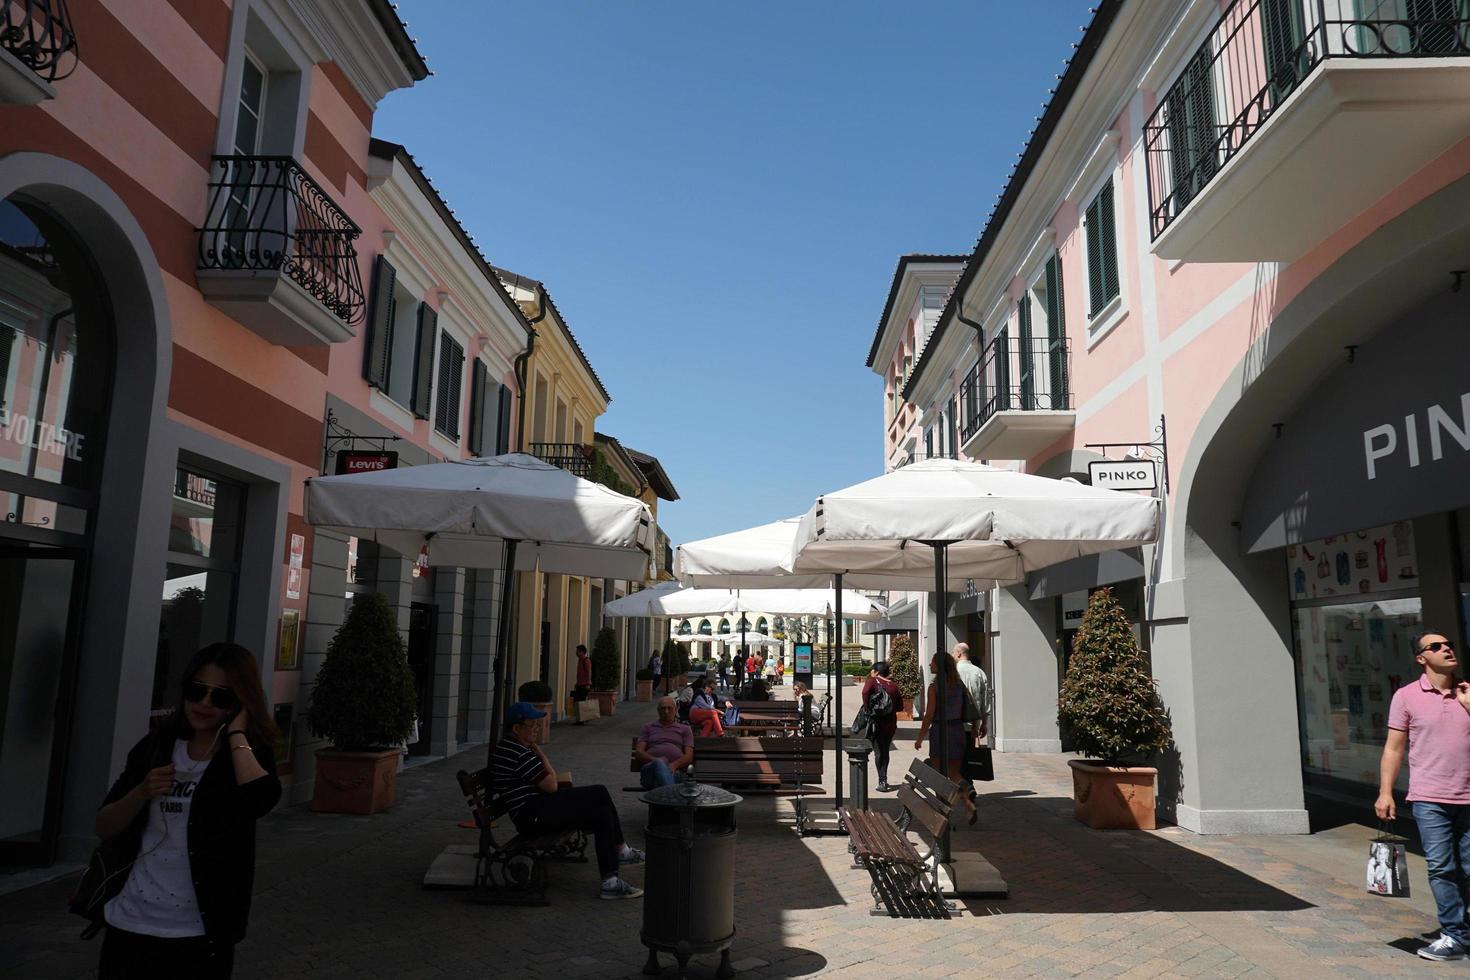 SERRAVALLE SCRIVIA, ITALY - APRIL 23 2018 - Mid summer season in designer outled is starting photo